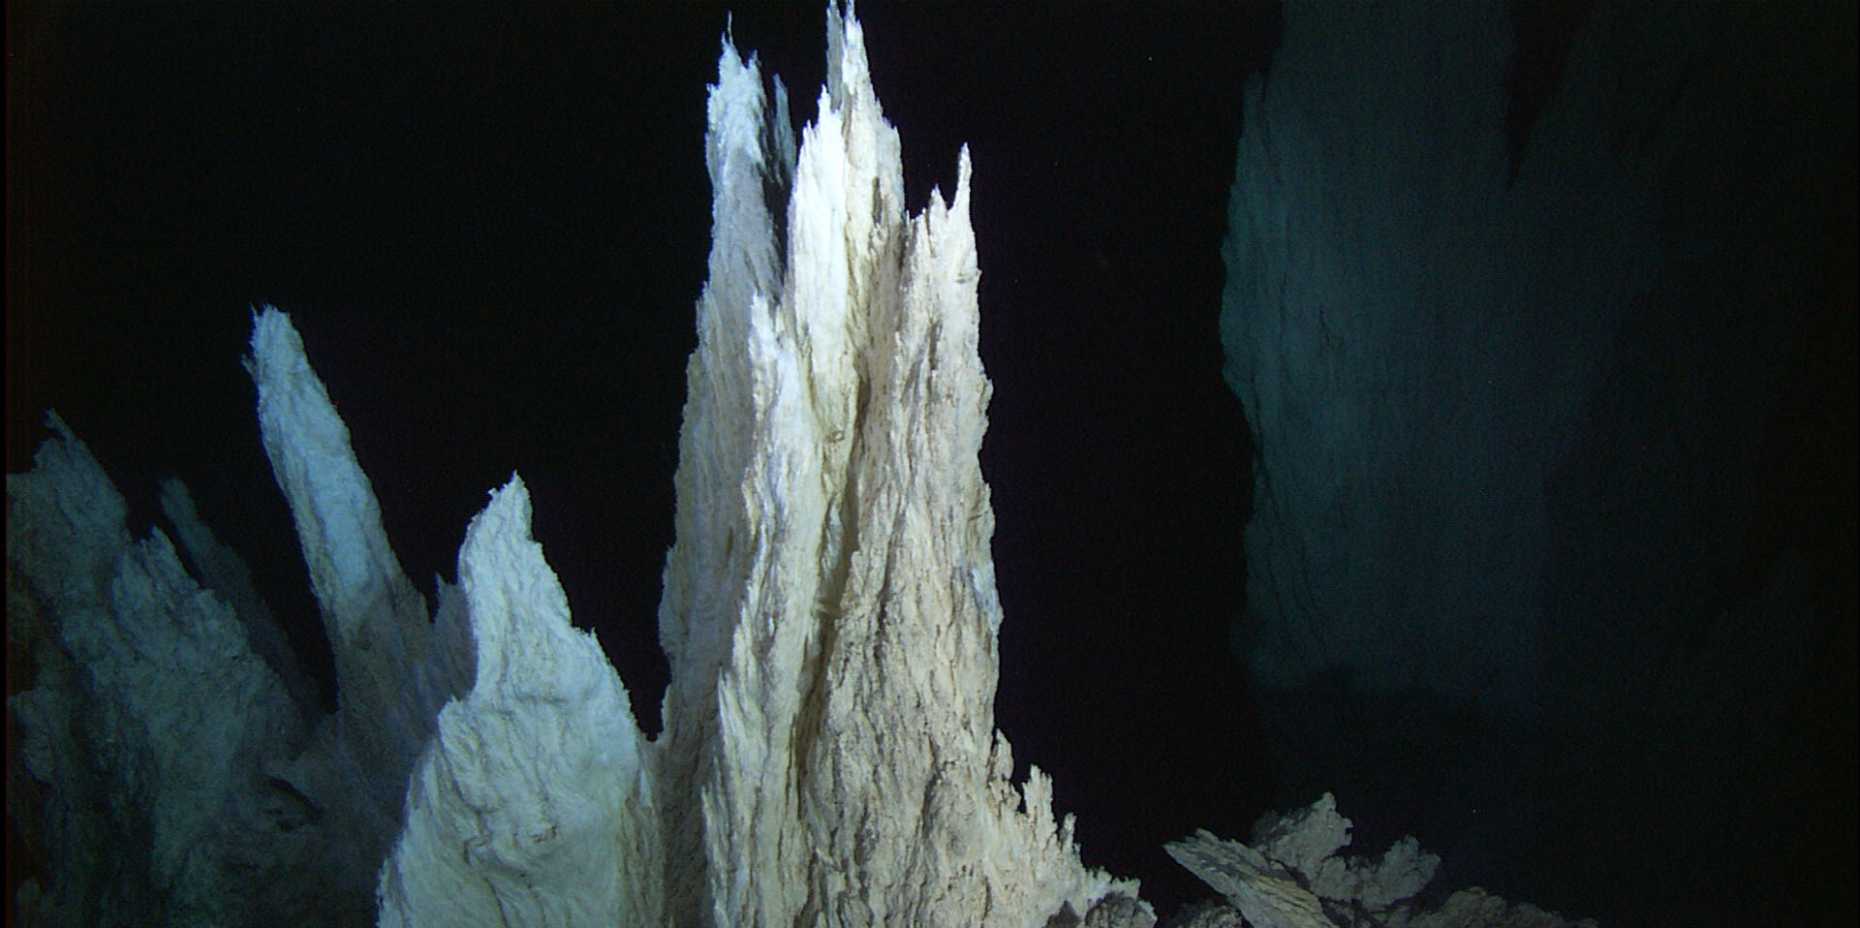 Hydrothermal fields in "Lost City"